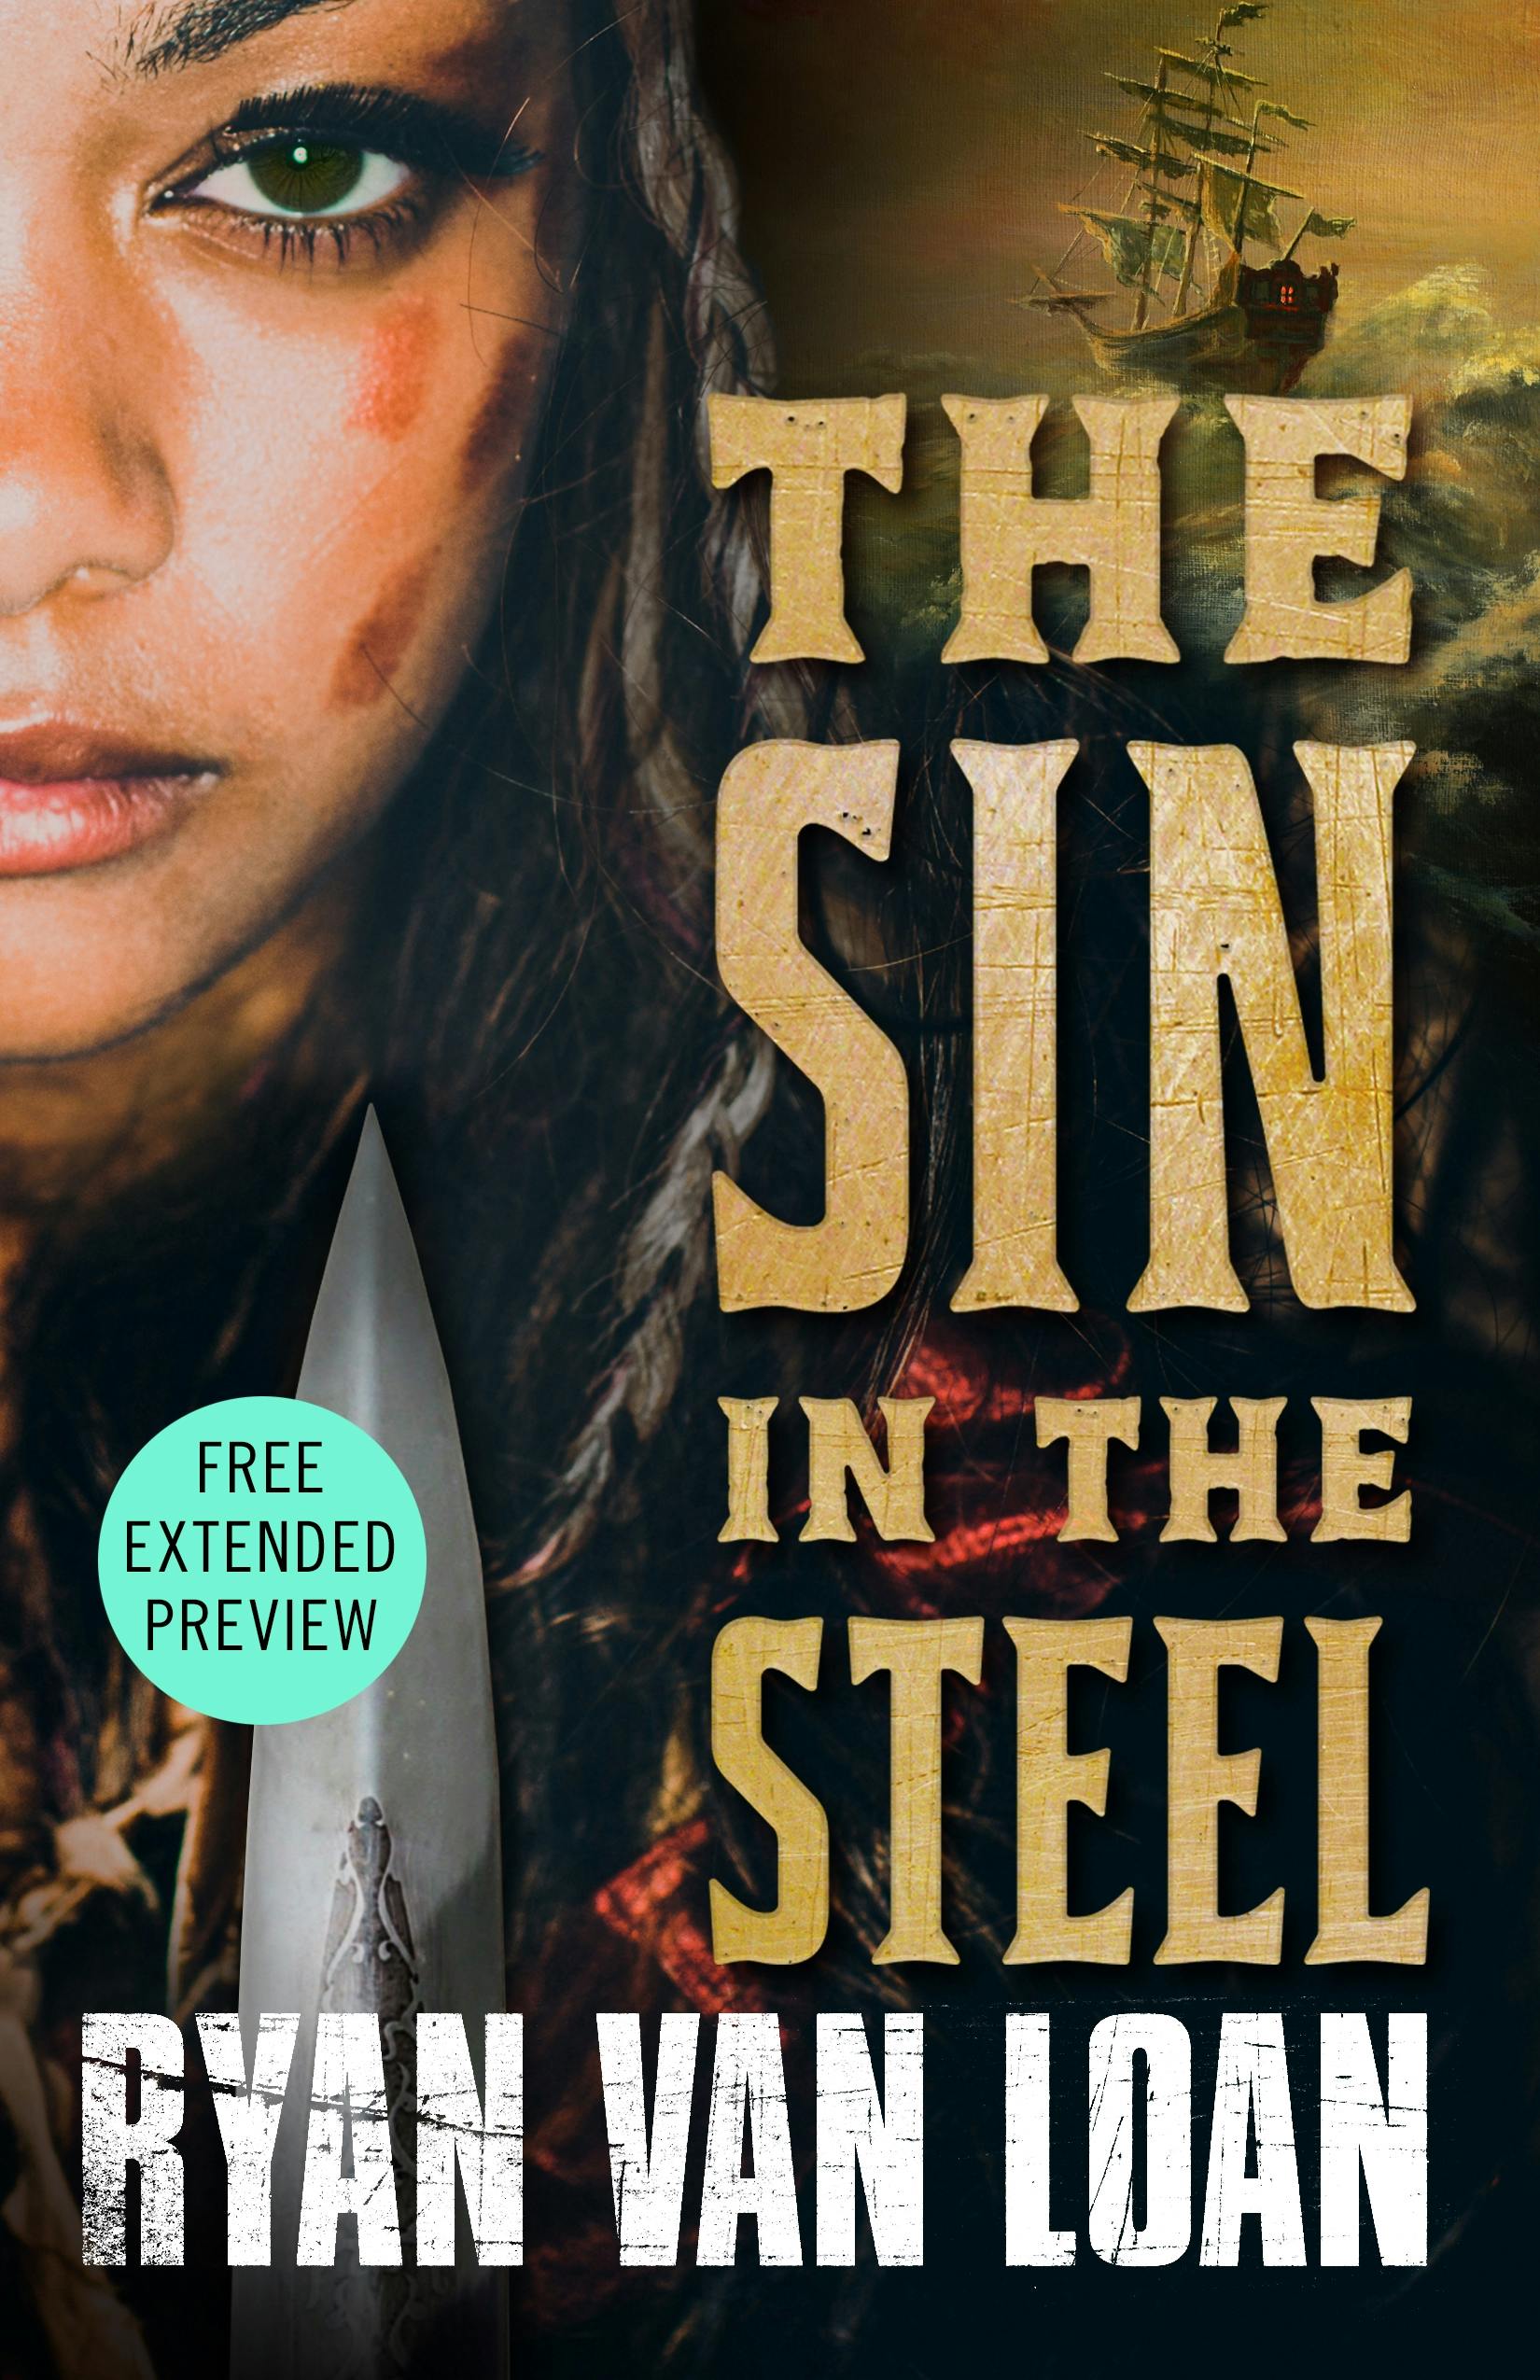 Cover for the book titled as: The Sin in the Steel Sneak Peek